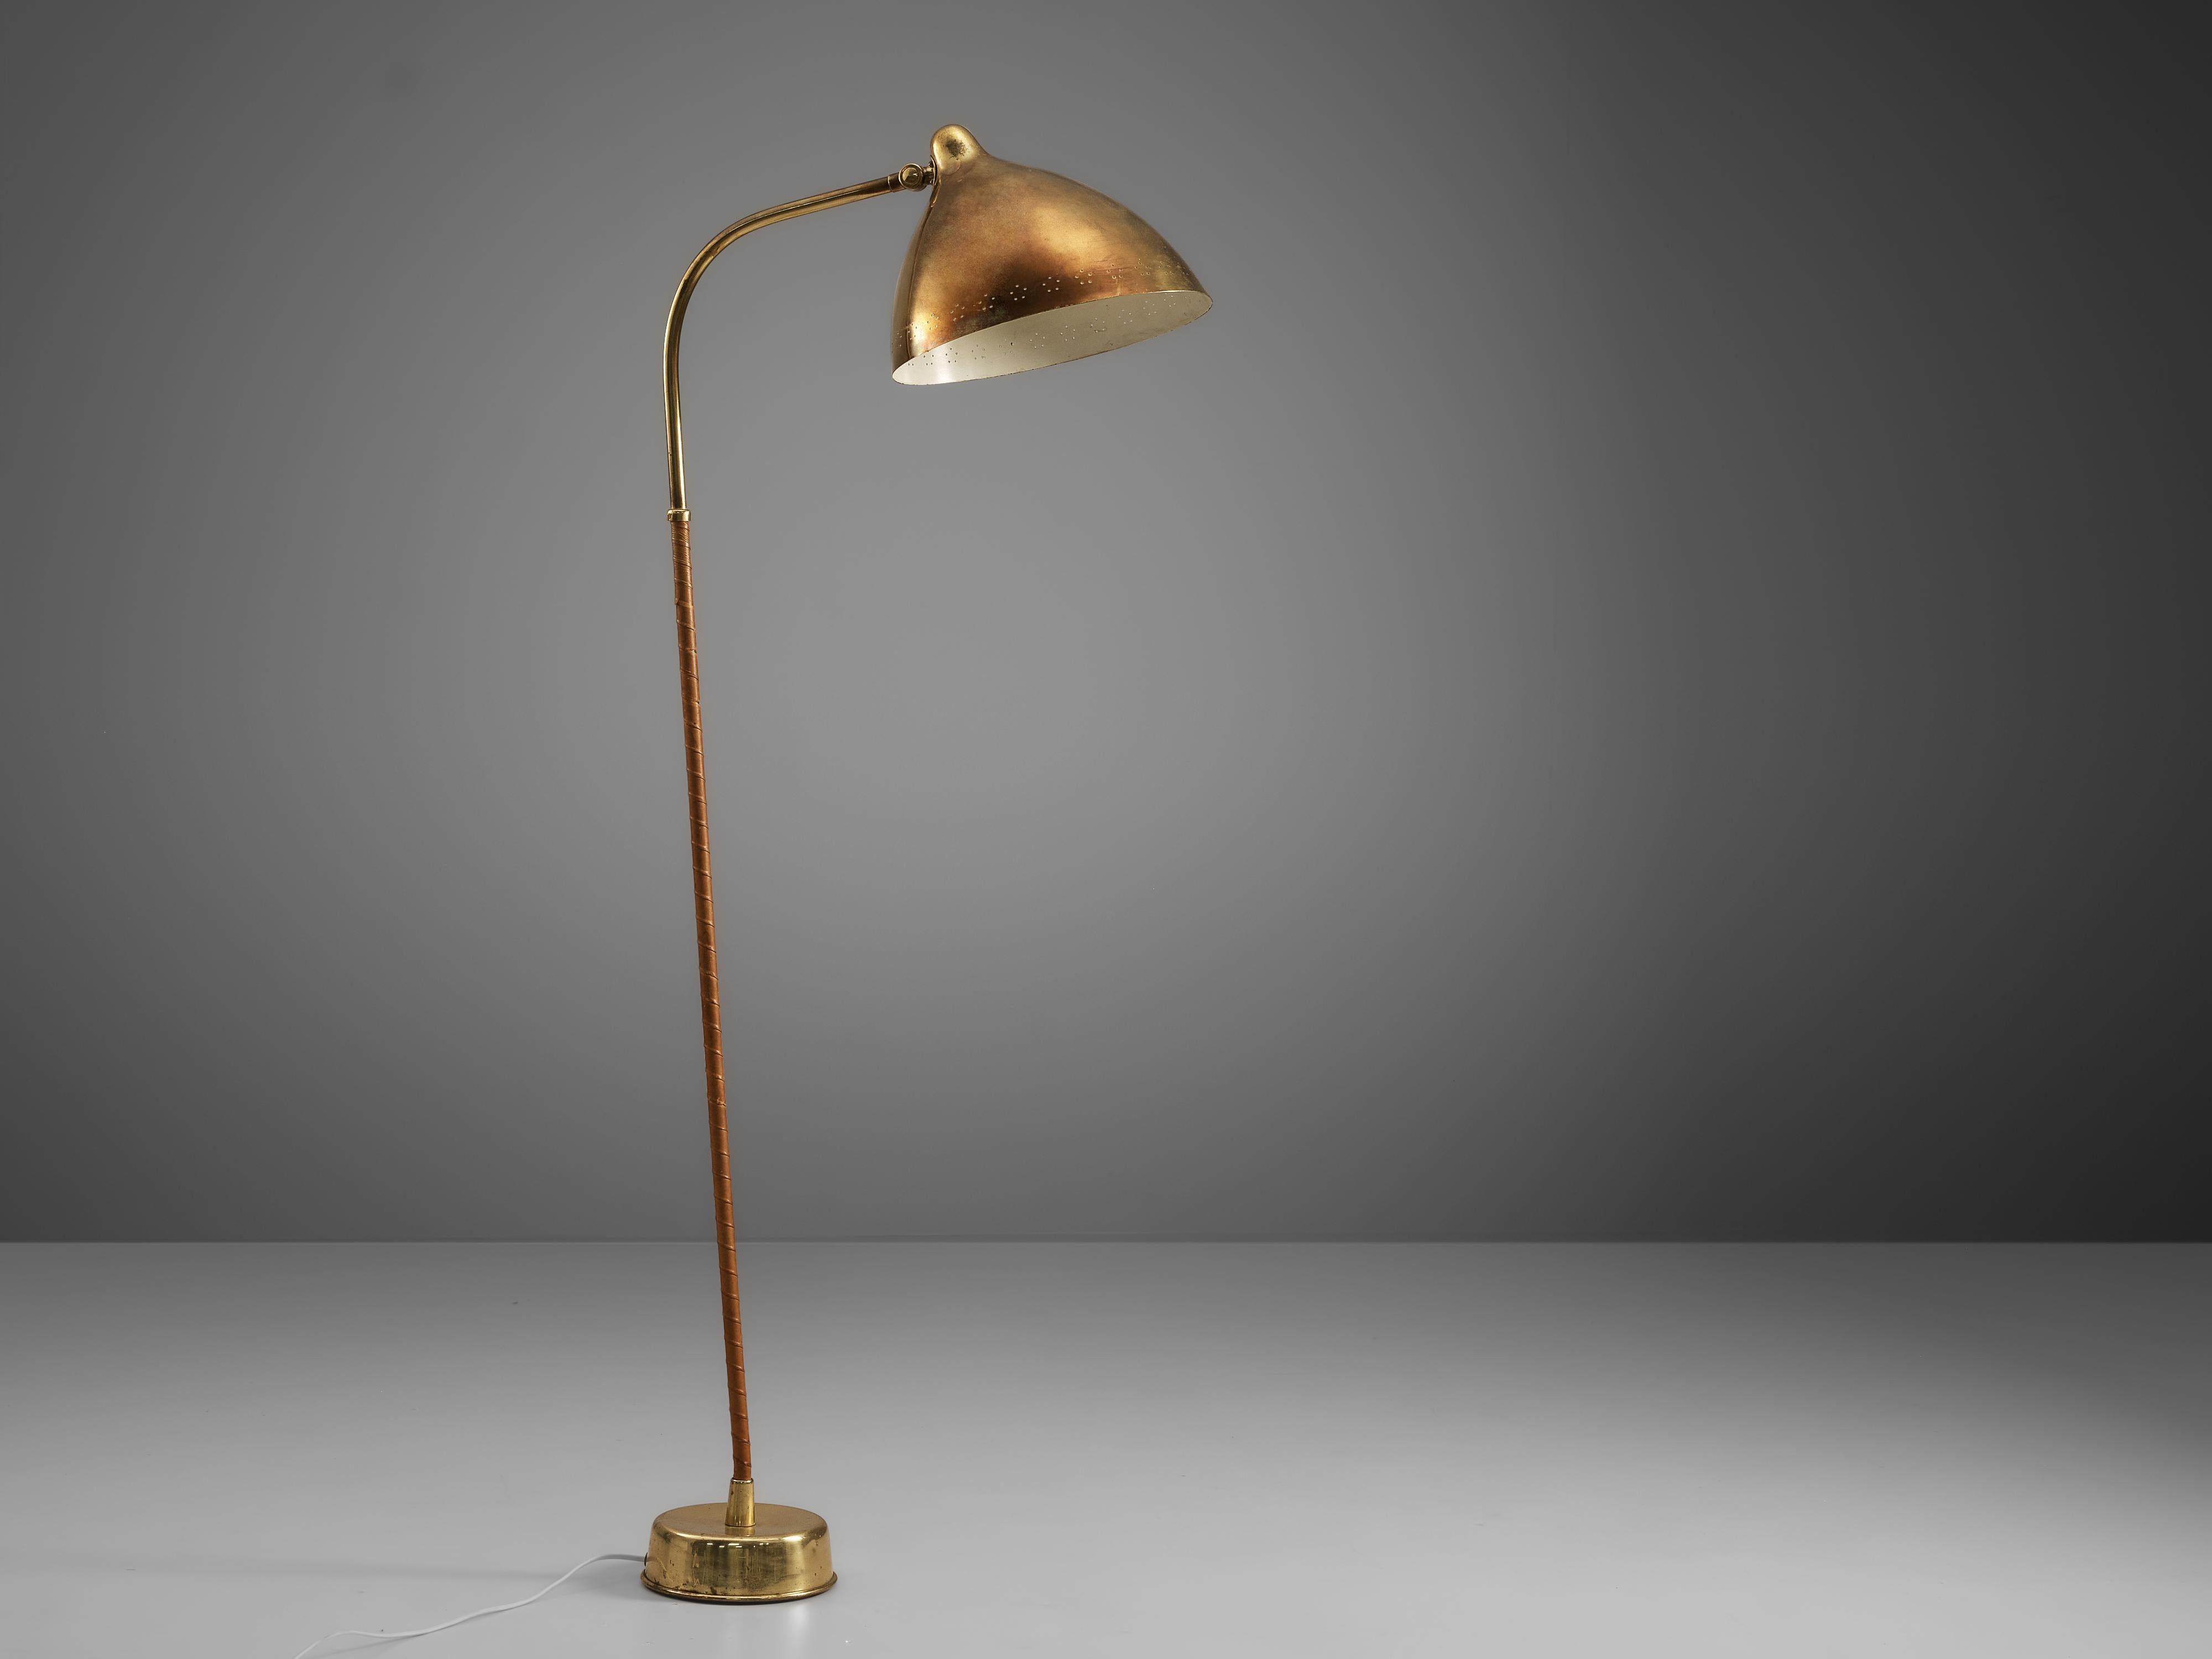 Scandinavian Modern Lisa Johansson-Pape for Orno Floor Lamp in Brass and Leather